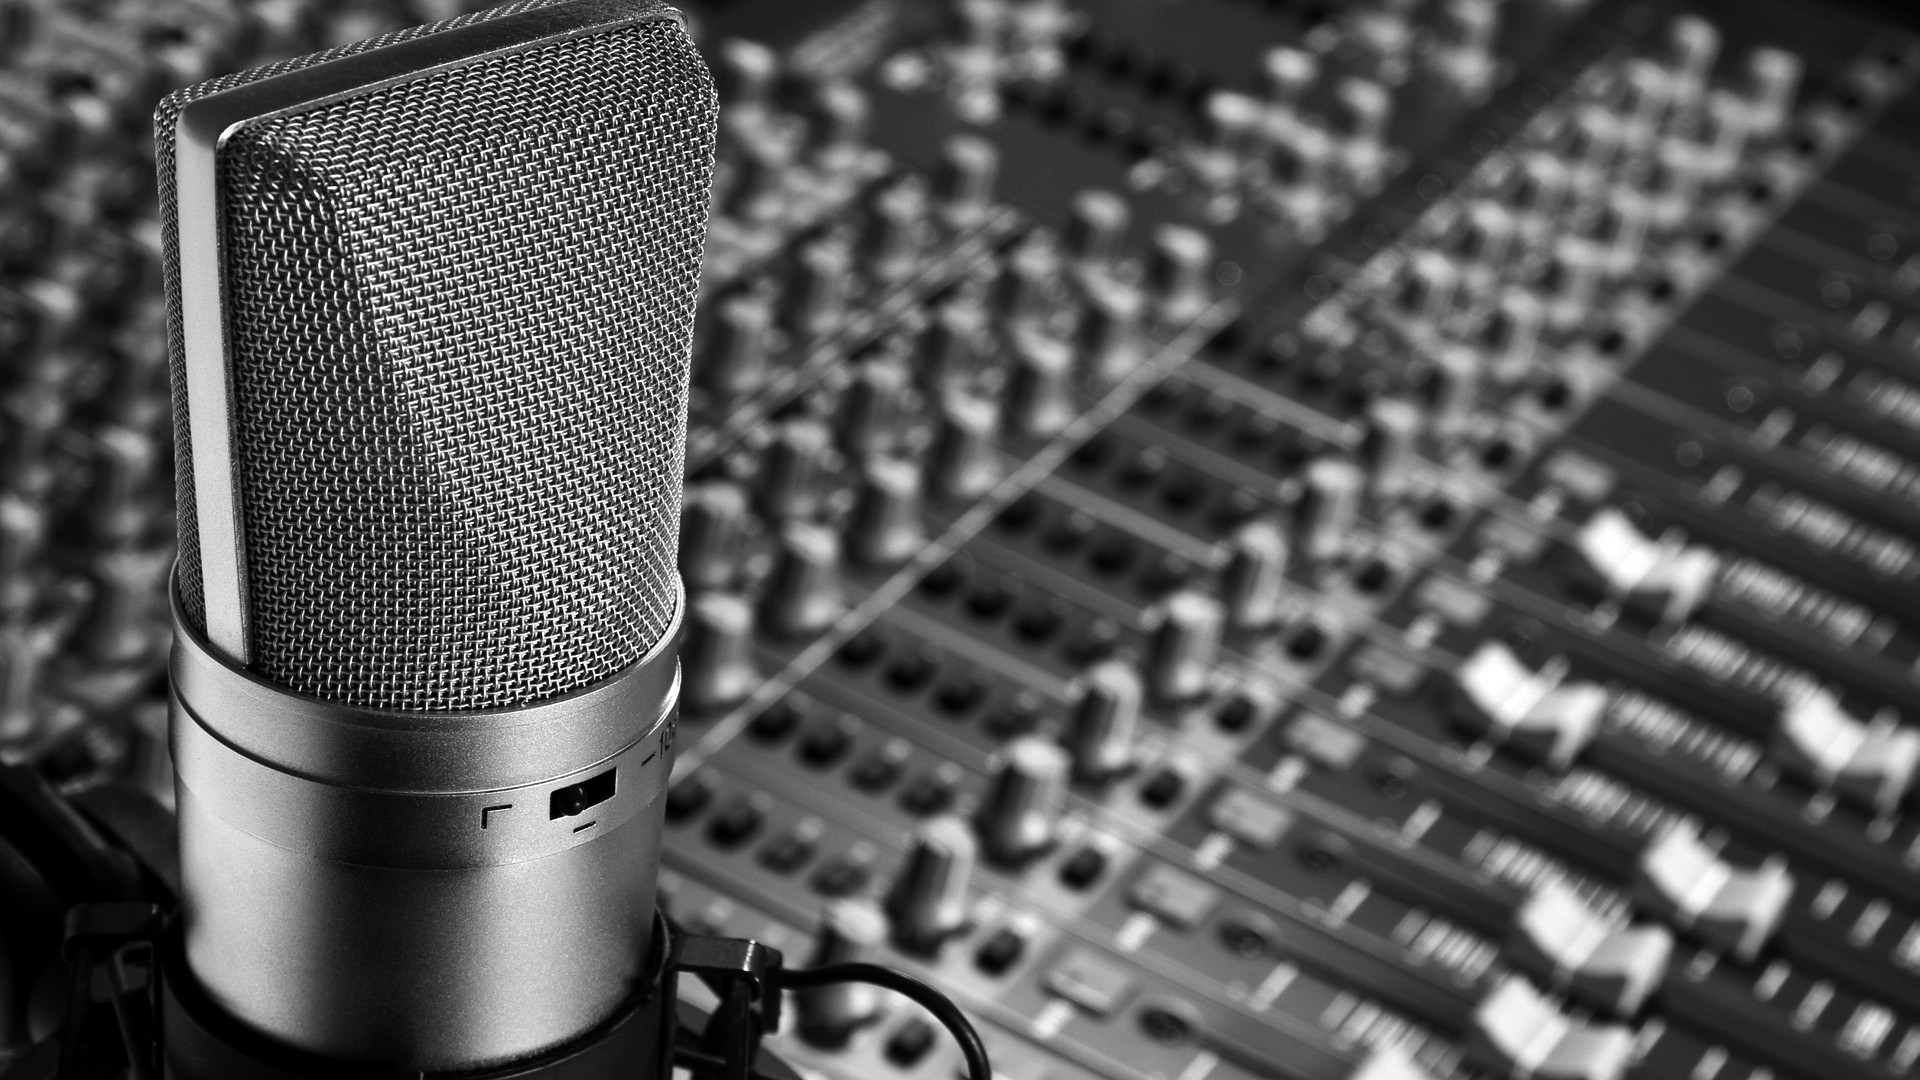 Monochrome Photography Closeup Microphone Mixing Consoles Technology Music Depth Of Field Buttons 1920x1080